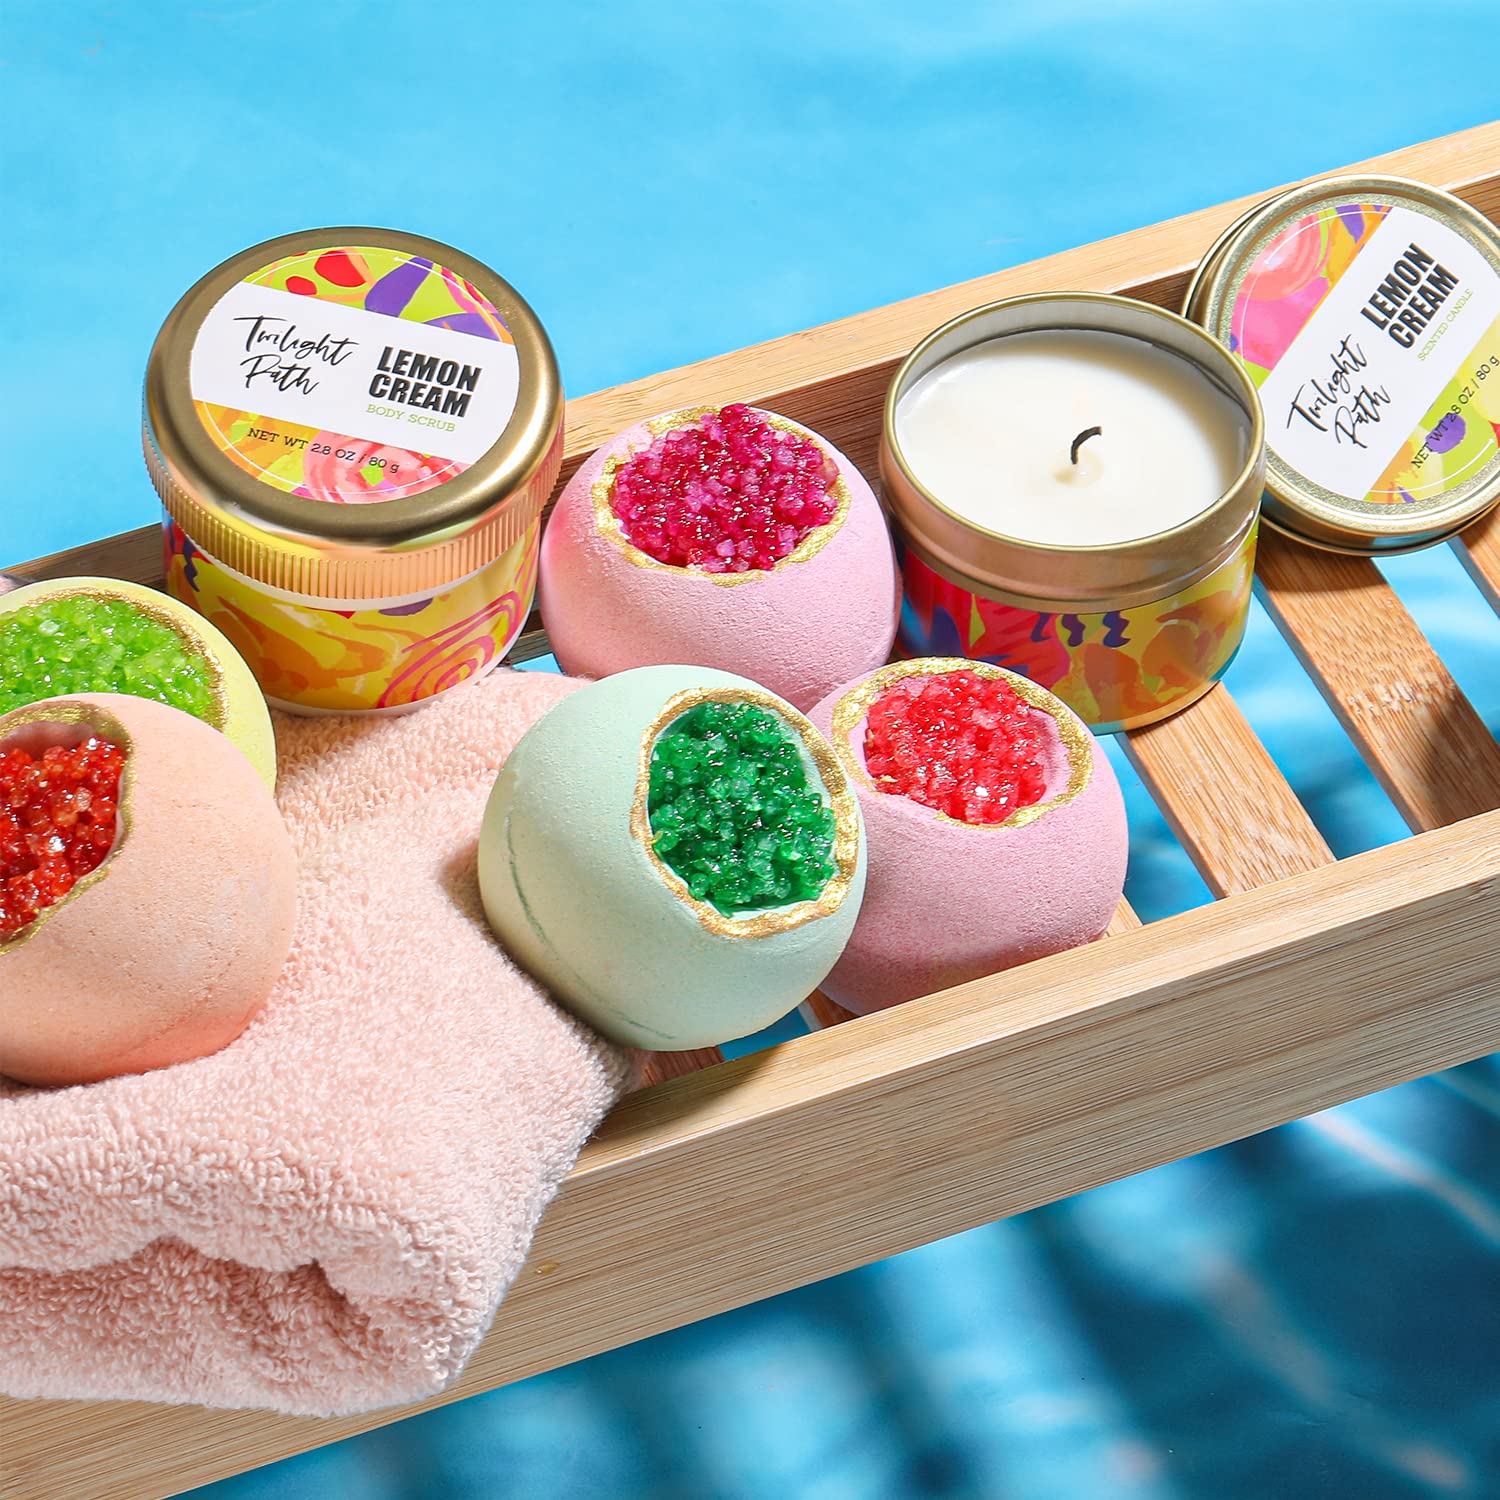 What Are the Different Types of Bath Bombs?